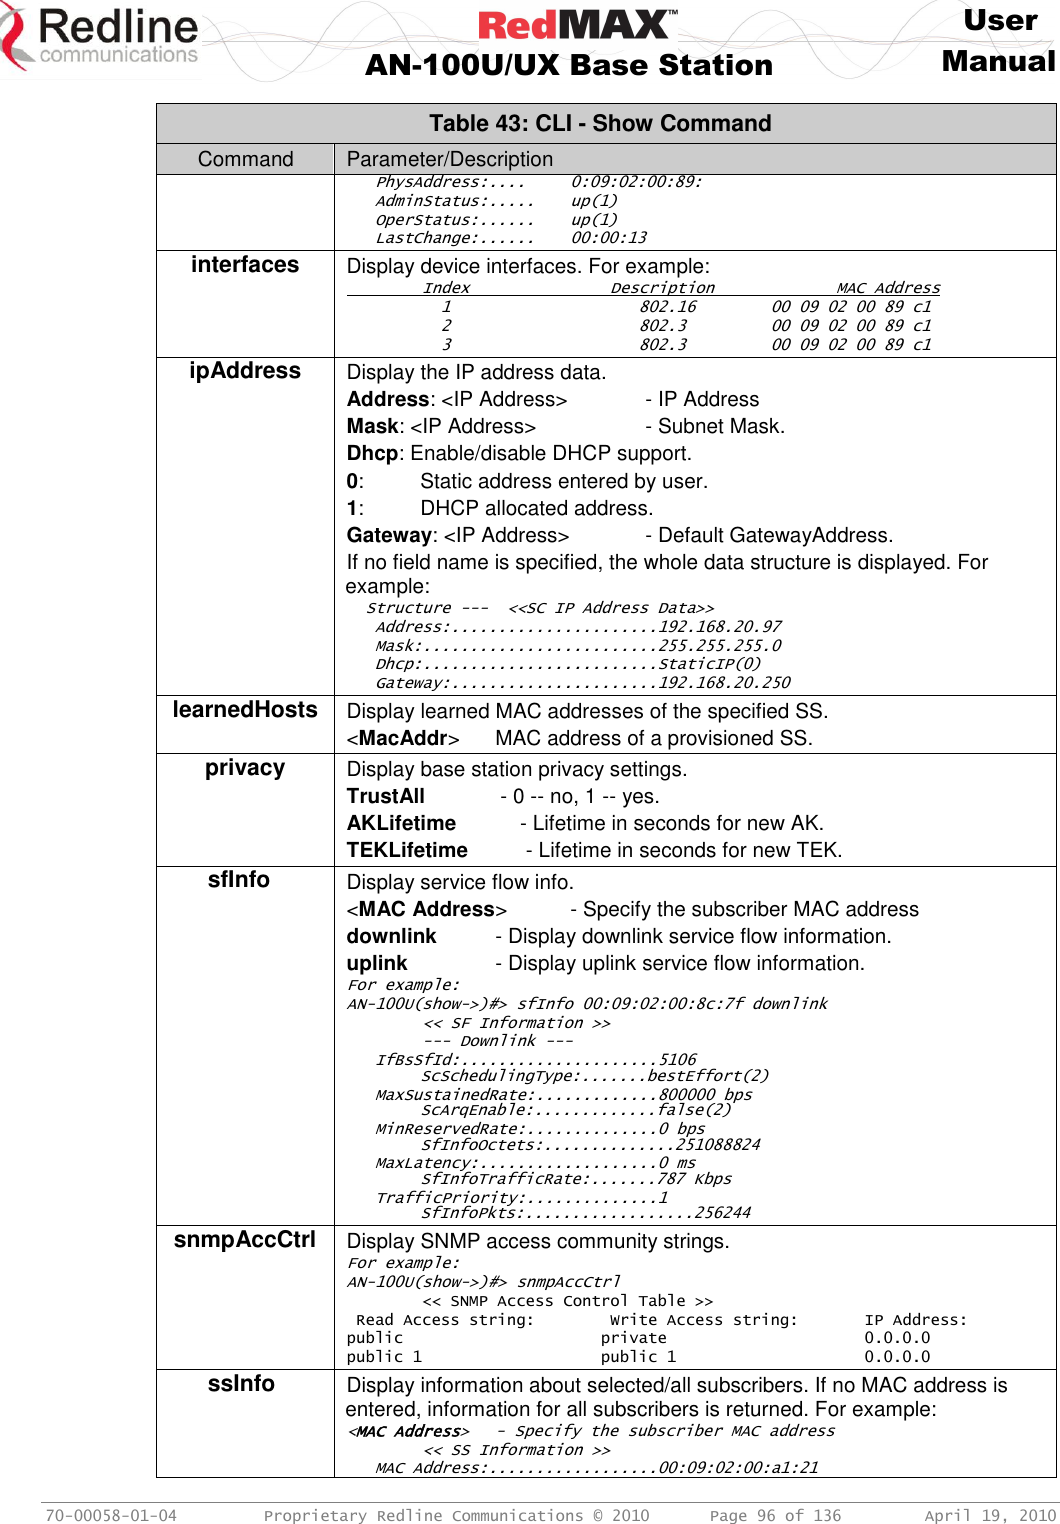     User  AN-100U/UX Base Station Manual   70-00058-01-04  Proprietary Redline Communications © 2010   Page 96 of 136  April 19, 2010 Table 43: CLI - Show Command Command Parameter/Description    PhysAddress:....  0:09:02:00:89:    AdminStatus:.....  up(1)    OperStatus:......  up(1)    LastChange:......  00:00:13 interfaces Display device interfaces. For example:         Index               Description             MAC Address           1                    802.16        00 09 02 00 89 c1           2                    802.3         00 09 02 00 89 c1           3                    802.3         00 09 02 00 89 c1 ipAddress Display the IP address data. Address: &lt;IP Address&gt;  - IP Address Mask: &lt;IP Address&gt;    - Subnet Mask. Dhcp: Enable/disable DHCP support. 0:  Static address entered by user. 1:  DHCP allocated address. Gateway: &lt;IP Address&gt;   - Default GatewayAddress. If no field name is specified, the whole data structure is displayed. For example:   Structure ---  &lt;&lt;SC IP Address Data&gt;&gt;    Address:......................192.168.20.97    Mask:.........................255.255.255.0    Dhcp:.........................StaticIP(0)    Gateway:......................192.168.20.250 learnedHosts Display learned MAC addresses of the specified SS. &lt;MacAddr&gt;  MAC address of a provisioned SS. privacy Display base station privacy settings. TrustAll             - 0 -- no, 1 -- yes. AKLifetime           - Lifetime in seconds for new AK. TEKLifetime          - Lifetime in seconds for new TEK. sfInfo  Display service flow info. &lt;MAC Address&gt;  - Specify the subscriber MAC address downlink  - Display downlink service flow information. uplink    - Display uplink service flow information. For example: AN-100U(show-&gt;)#&gt; sfInfo 00:09:02:00:8c:7f downlink         &lt;&lt; SF Information &gt;&gt;         --- Downlink ---    IfBsSfId:.....................5106     ScSchedulingType:.......bestEffort(2)    MaxSustainedRate:.............800000 bps  ScArqEnable:.............false(2)    MinReservedRate:..............0 bps   SfInfoOctets:..............251088824    MaxLatency:...................0 ms   SfInfoTrafficRate:.......787 Kbps    TrafficPriority:..............1     SfInfoPkts:..................256244 snmpAccCtrl Display SNMP access community strings. For example: AN-100U(show-&gt;)#&gt; snmpAccCtrl         &lt;&lt; SNMP Access Control Table &gt;&gt;  Read Access string:        Write Access string:       IP Address: public                     private                     0.0.0.0 public 1                   public 1                    0.0.0.0 ssInfo  Display information about selected/all subscribers. If no MAC address is entered, information for all subscribers is returned. For example: &lt;MAC Address&gt;  - Specify the subscriber MAC address          &lt;&lt; SS Information &gt;&gt;    MAC Address:..................00:09:02:00:a1:21